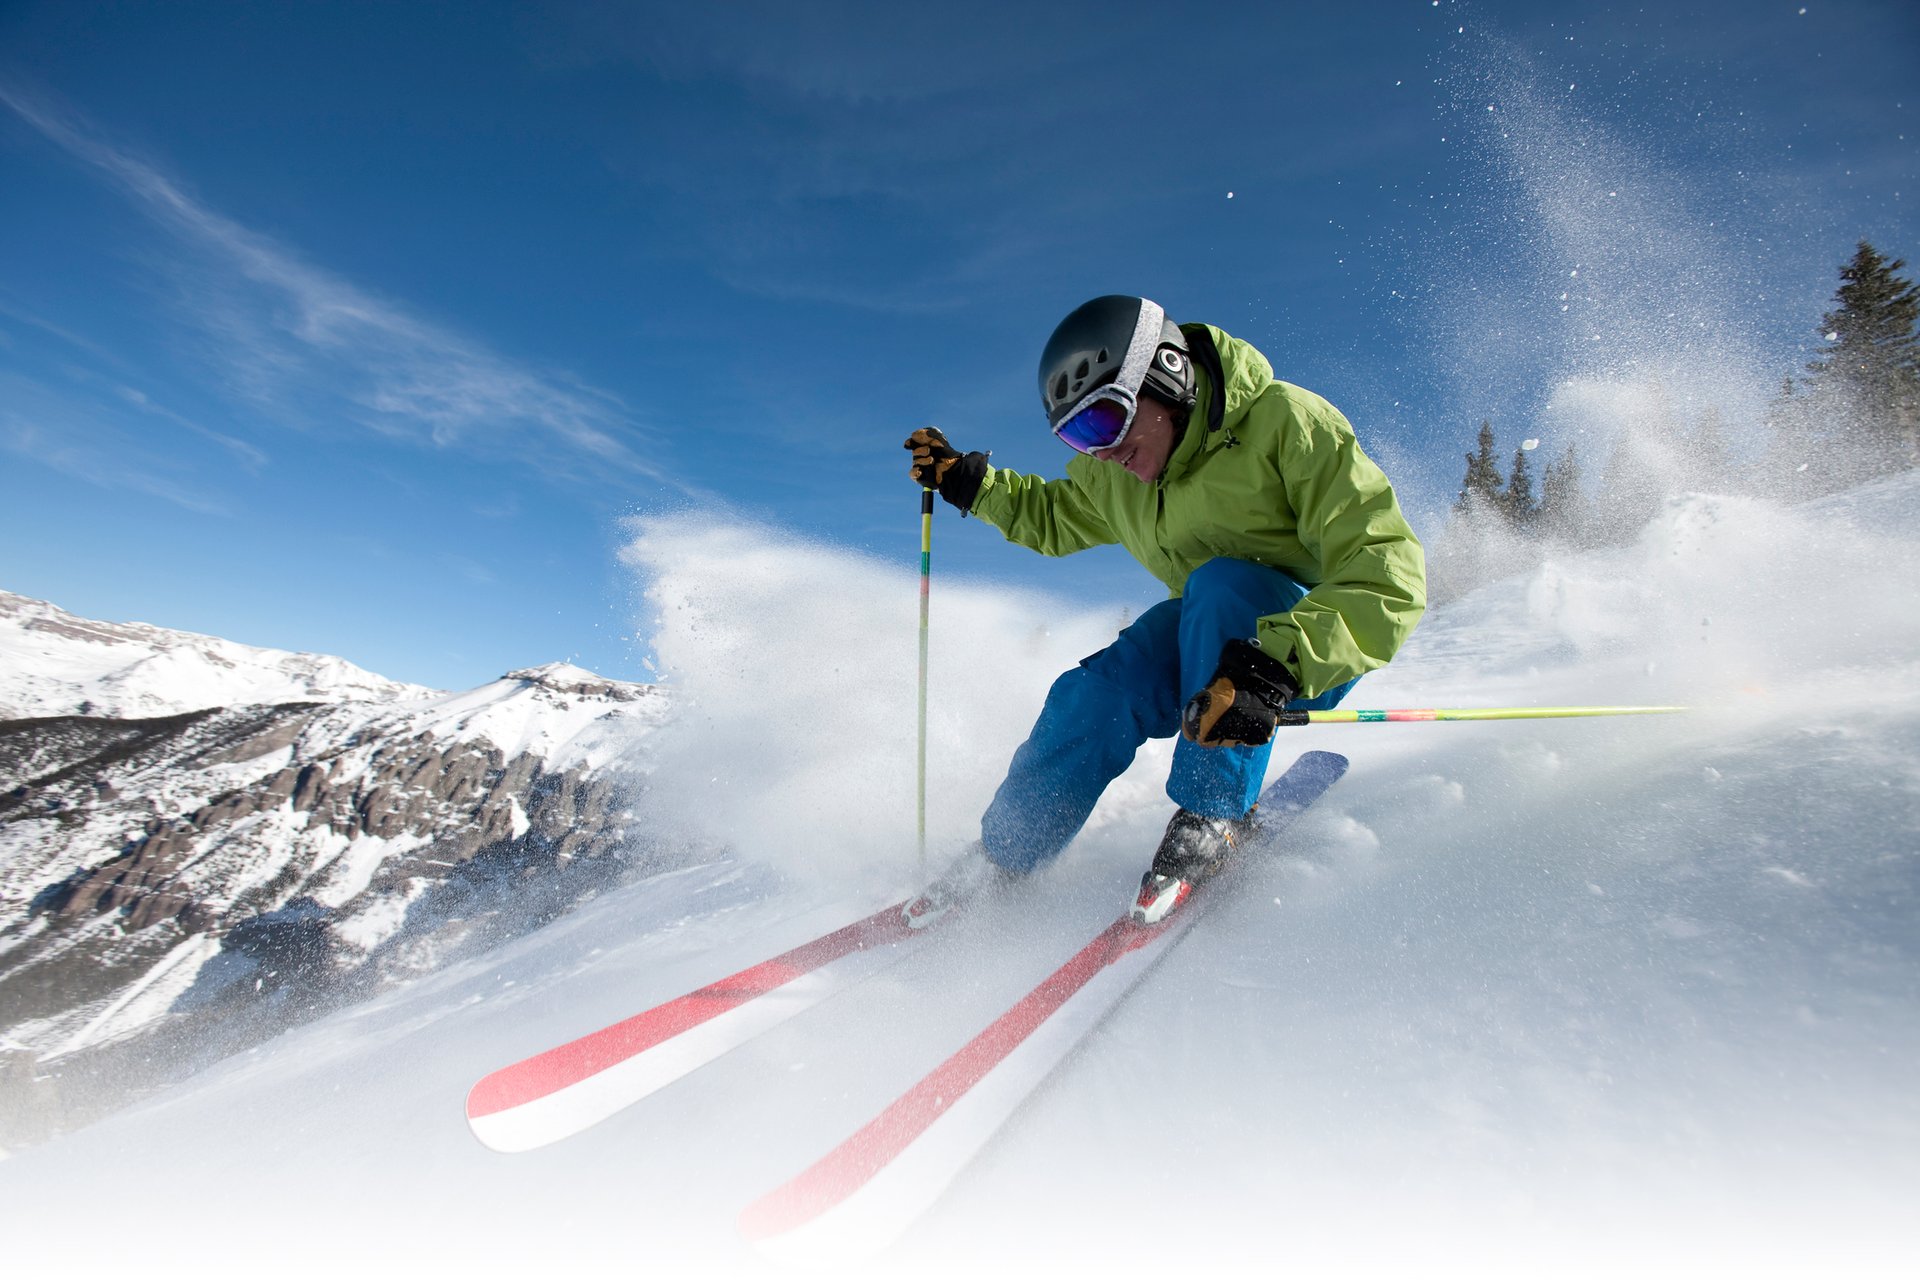 Skiing with polarized sport sunglasses